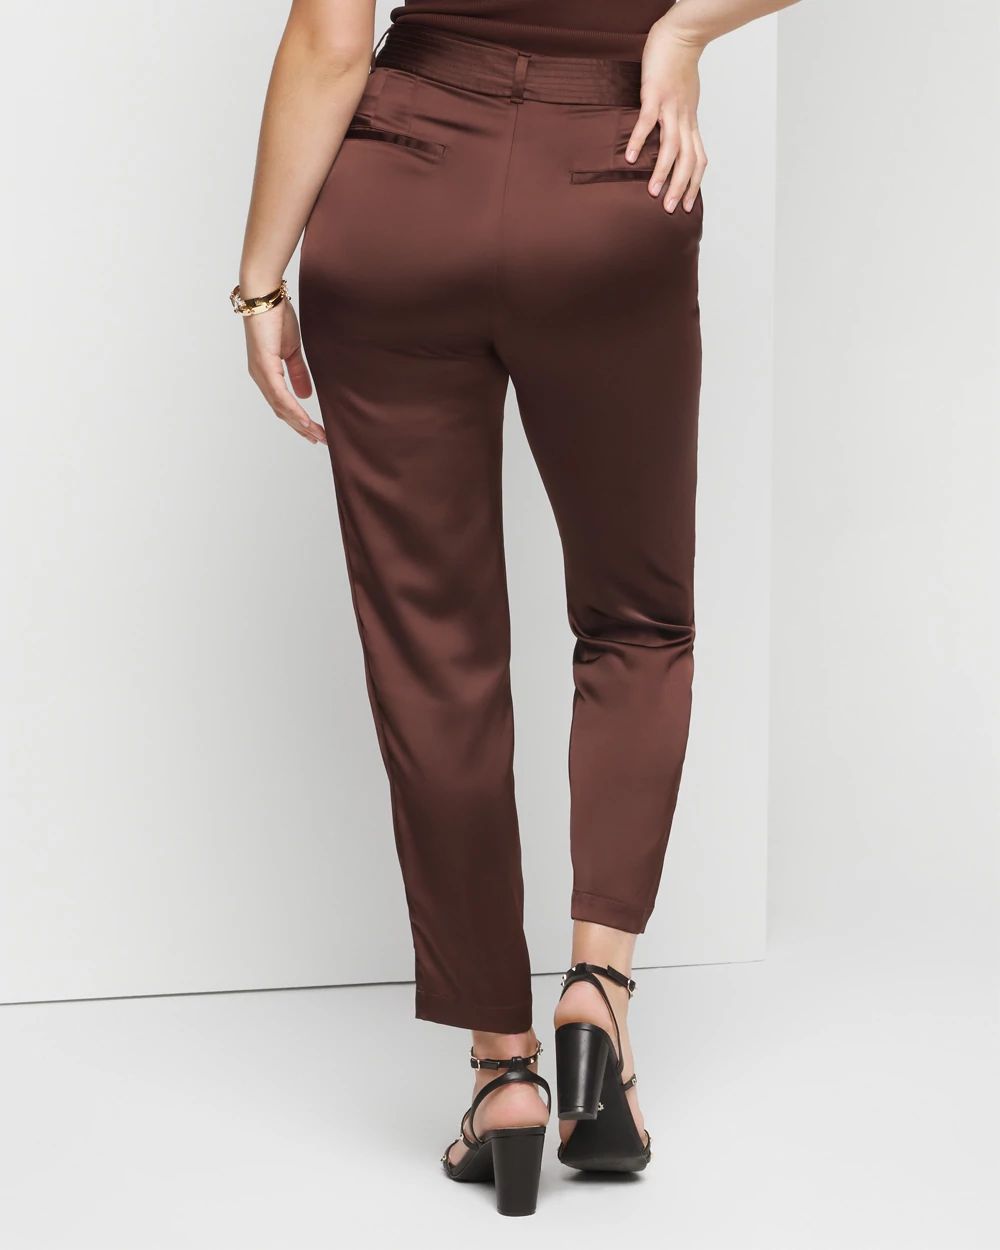 Belted Utility Straight Crop Pants click to view larger image.